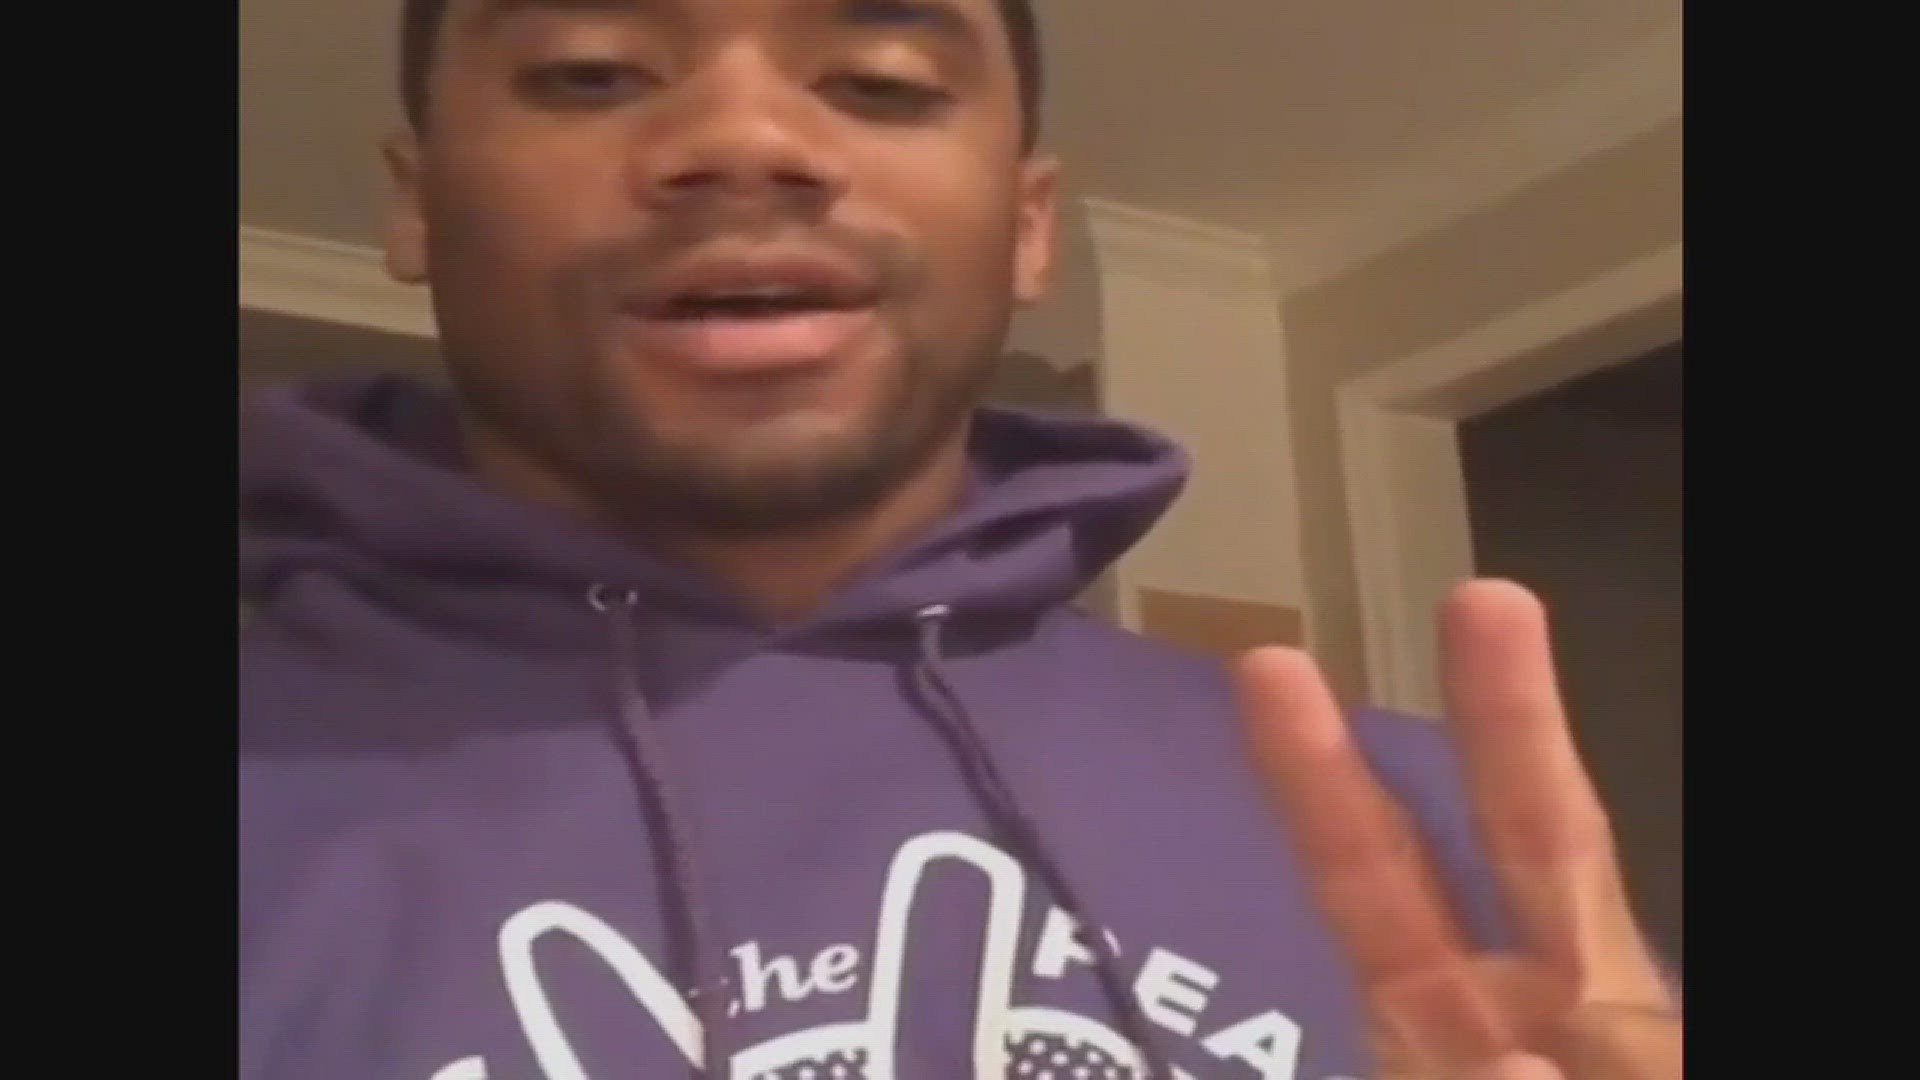 The Seahawks quarterback launched a campaign called "Pass the Peace."